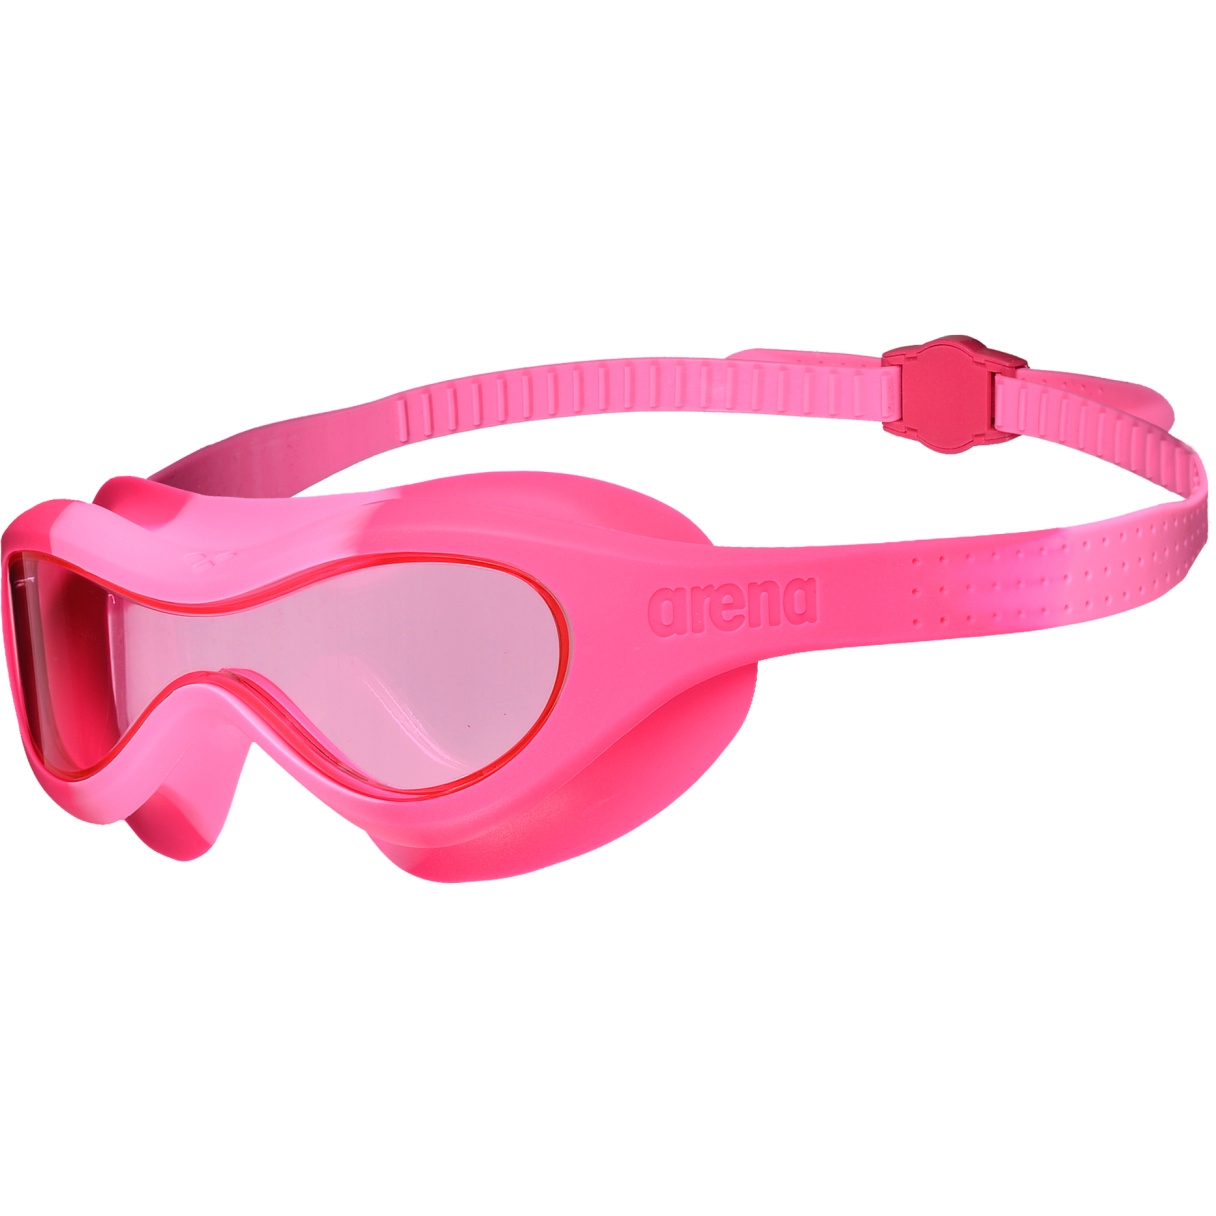 Image of arena Spider Kids Mask Swimming Goggles - Pink - Freakrose/Pink